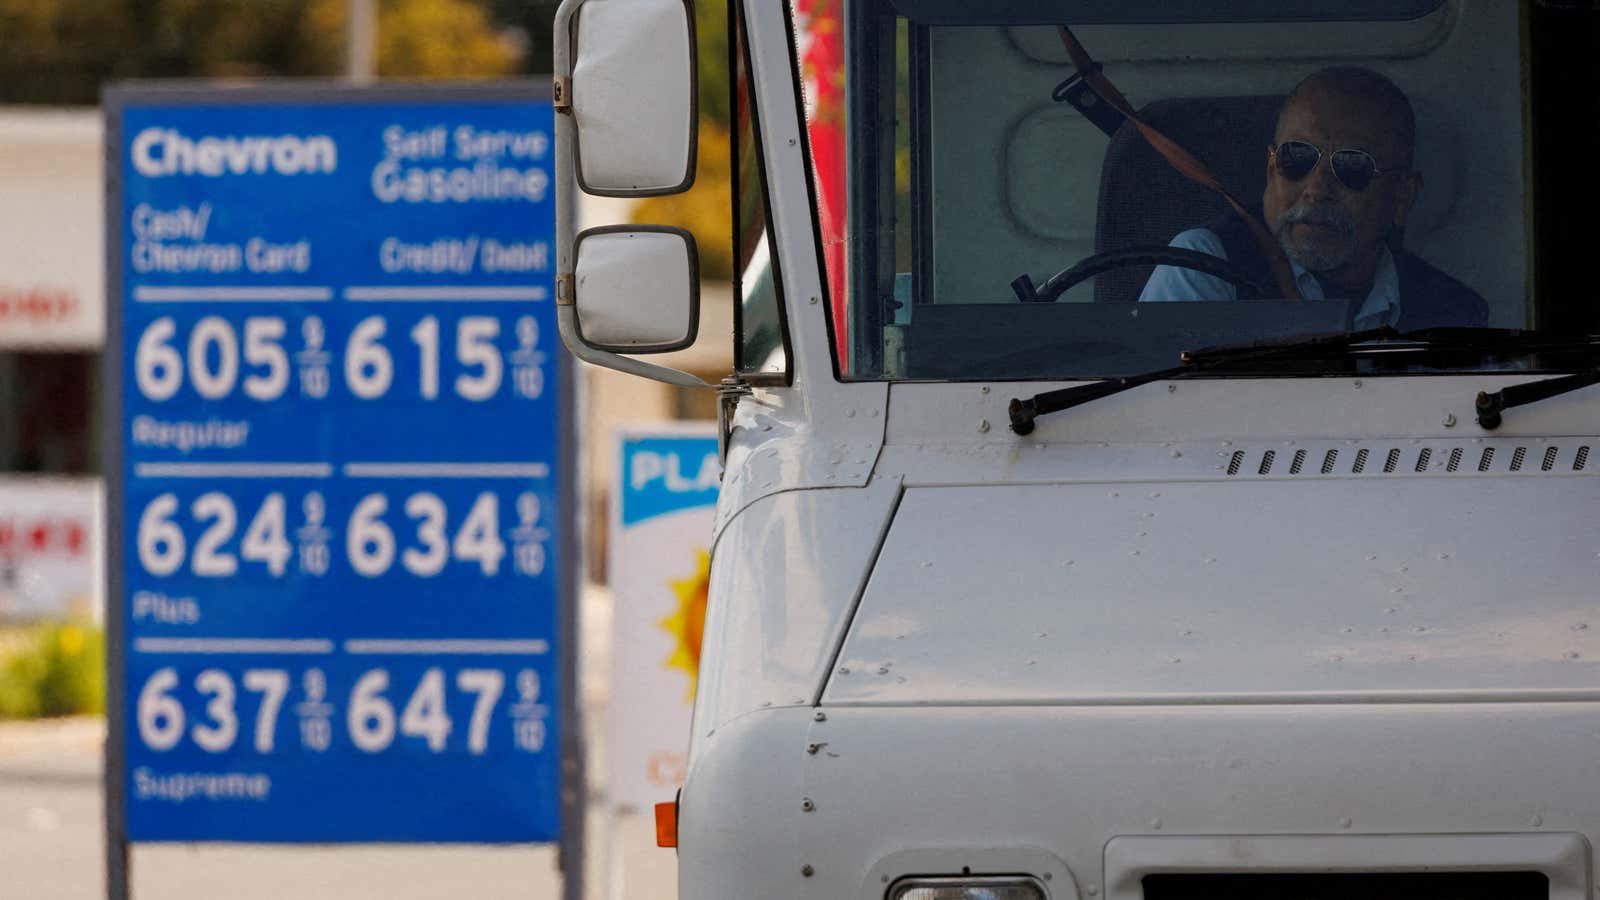 In California, gas prices have crested above $6 per gallon.